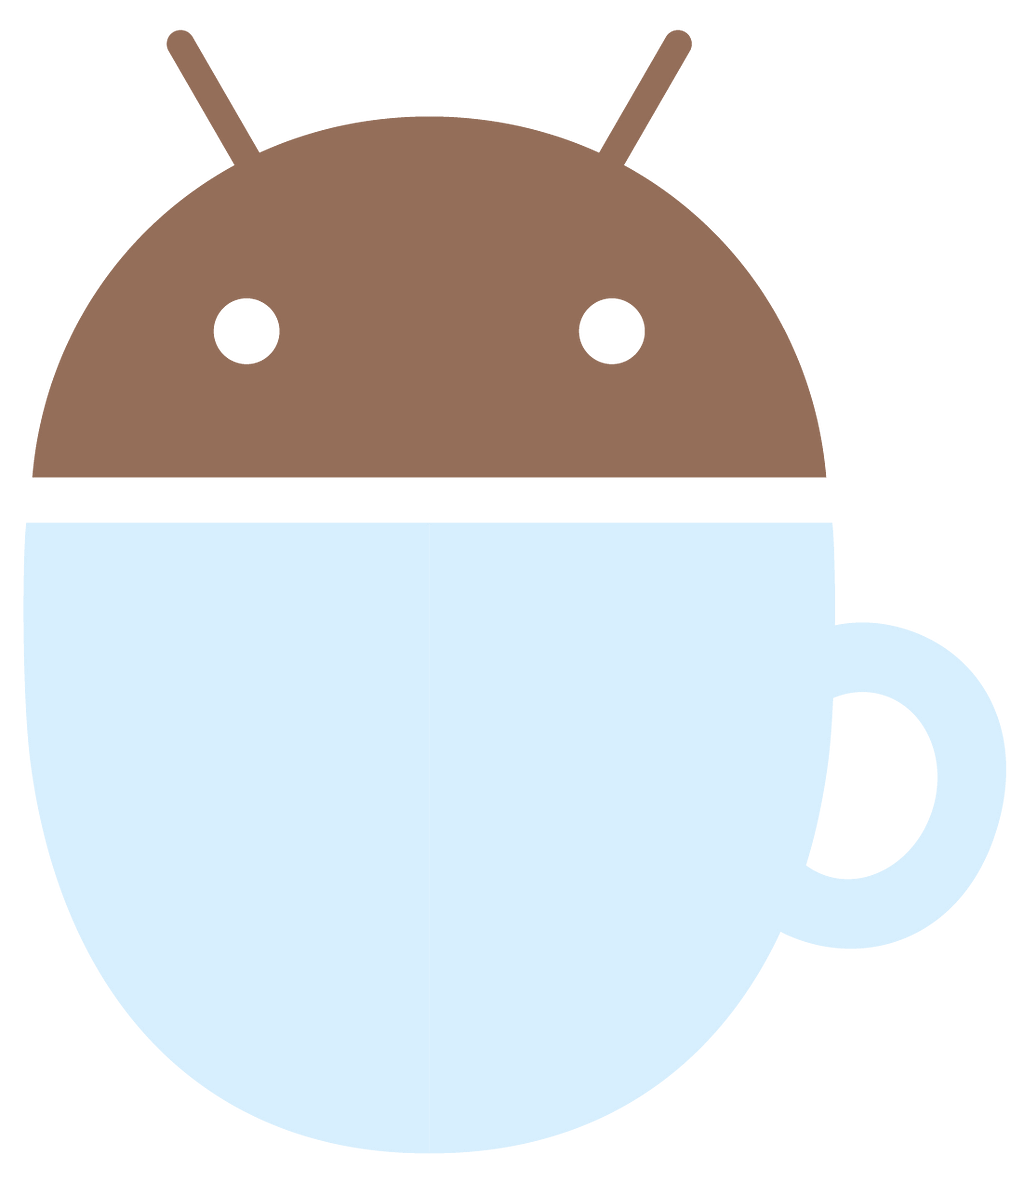 Android Espresso instrumented test